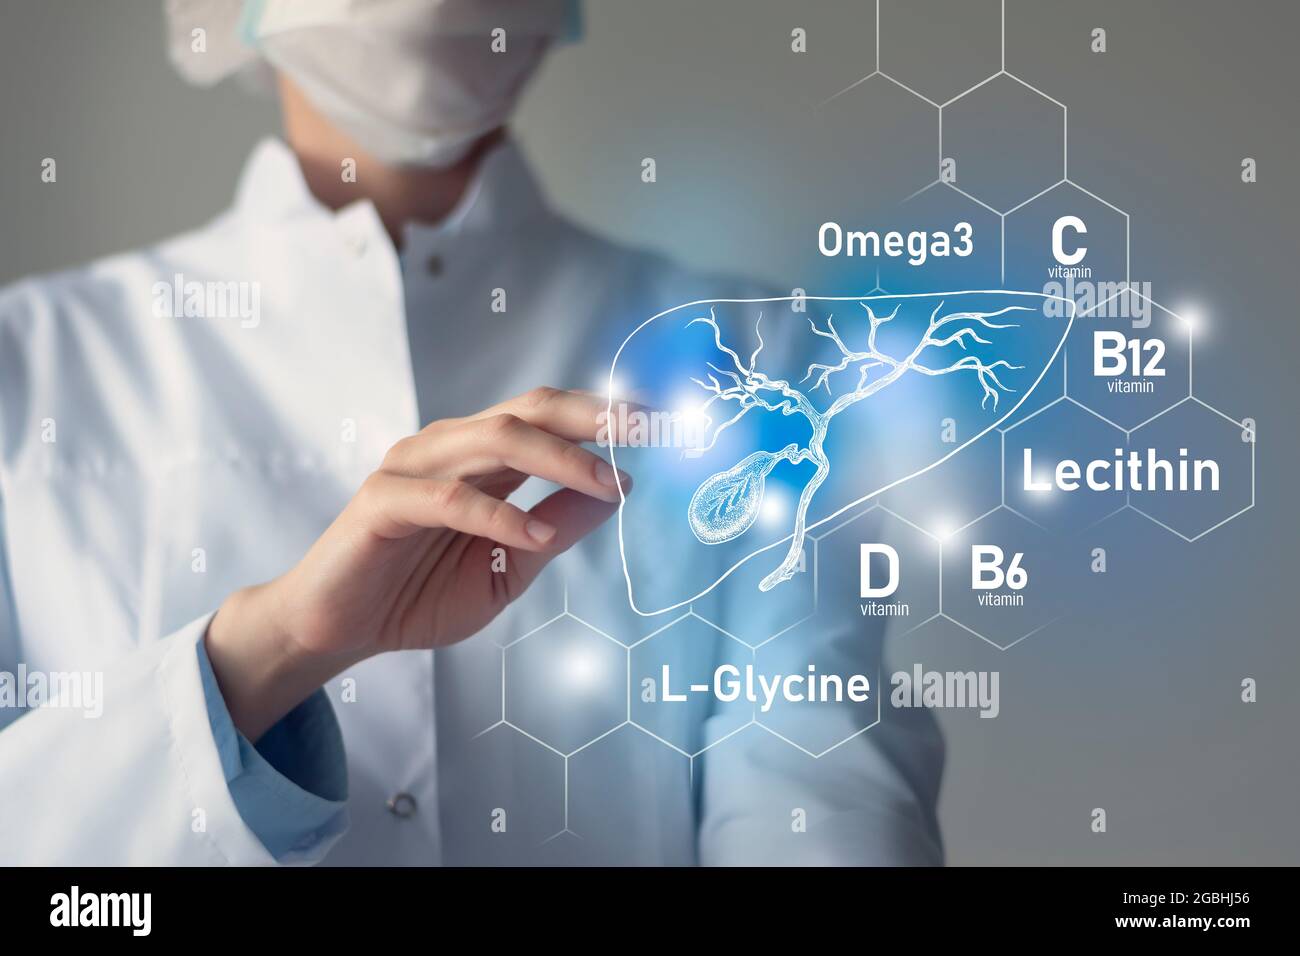 Essential nutrients for Gall Bladder health including Omega 3, L-Glycine, Omega3, Lecithin. Blurred portrait of doctor holding highlighted blue Gall B Stock Photo